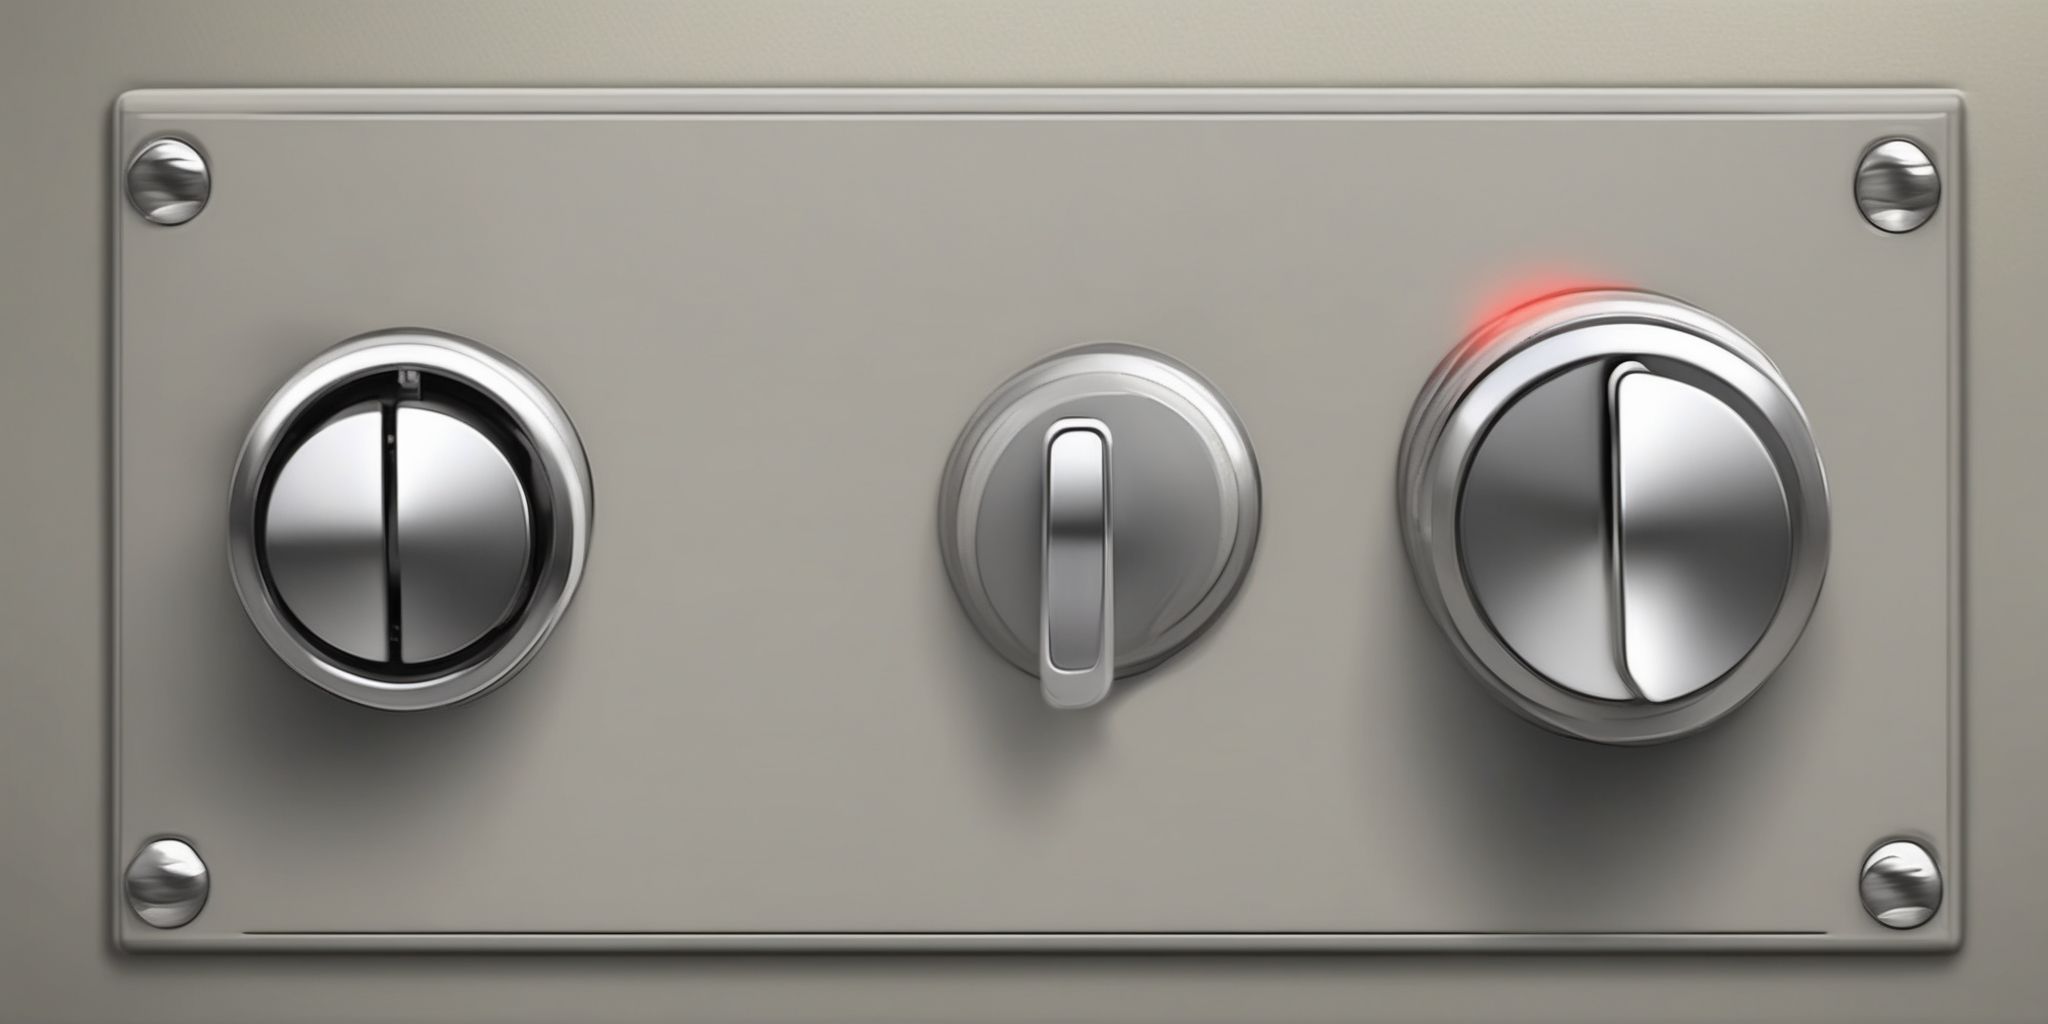 Power switch  in realistic, photographic style